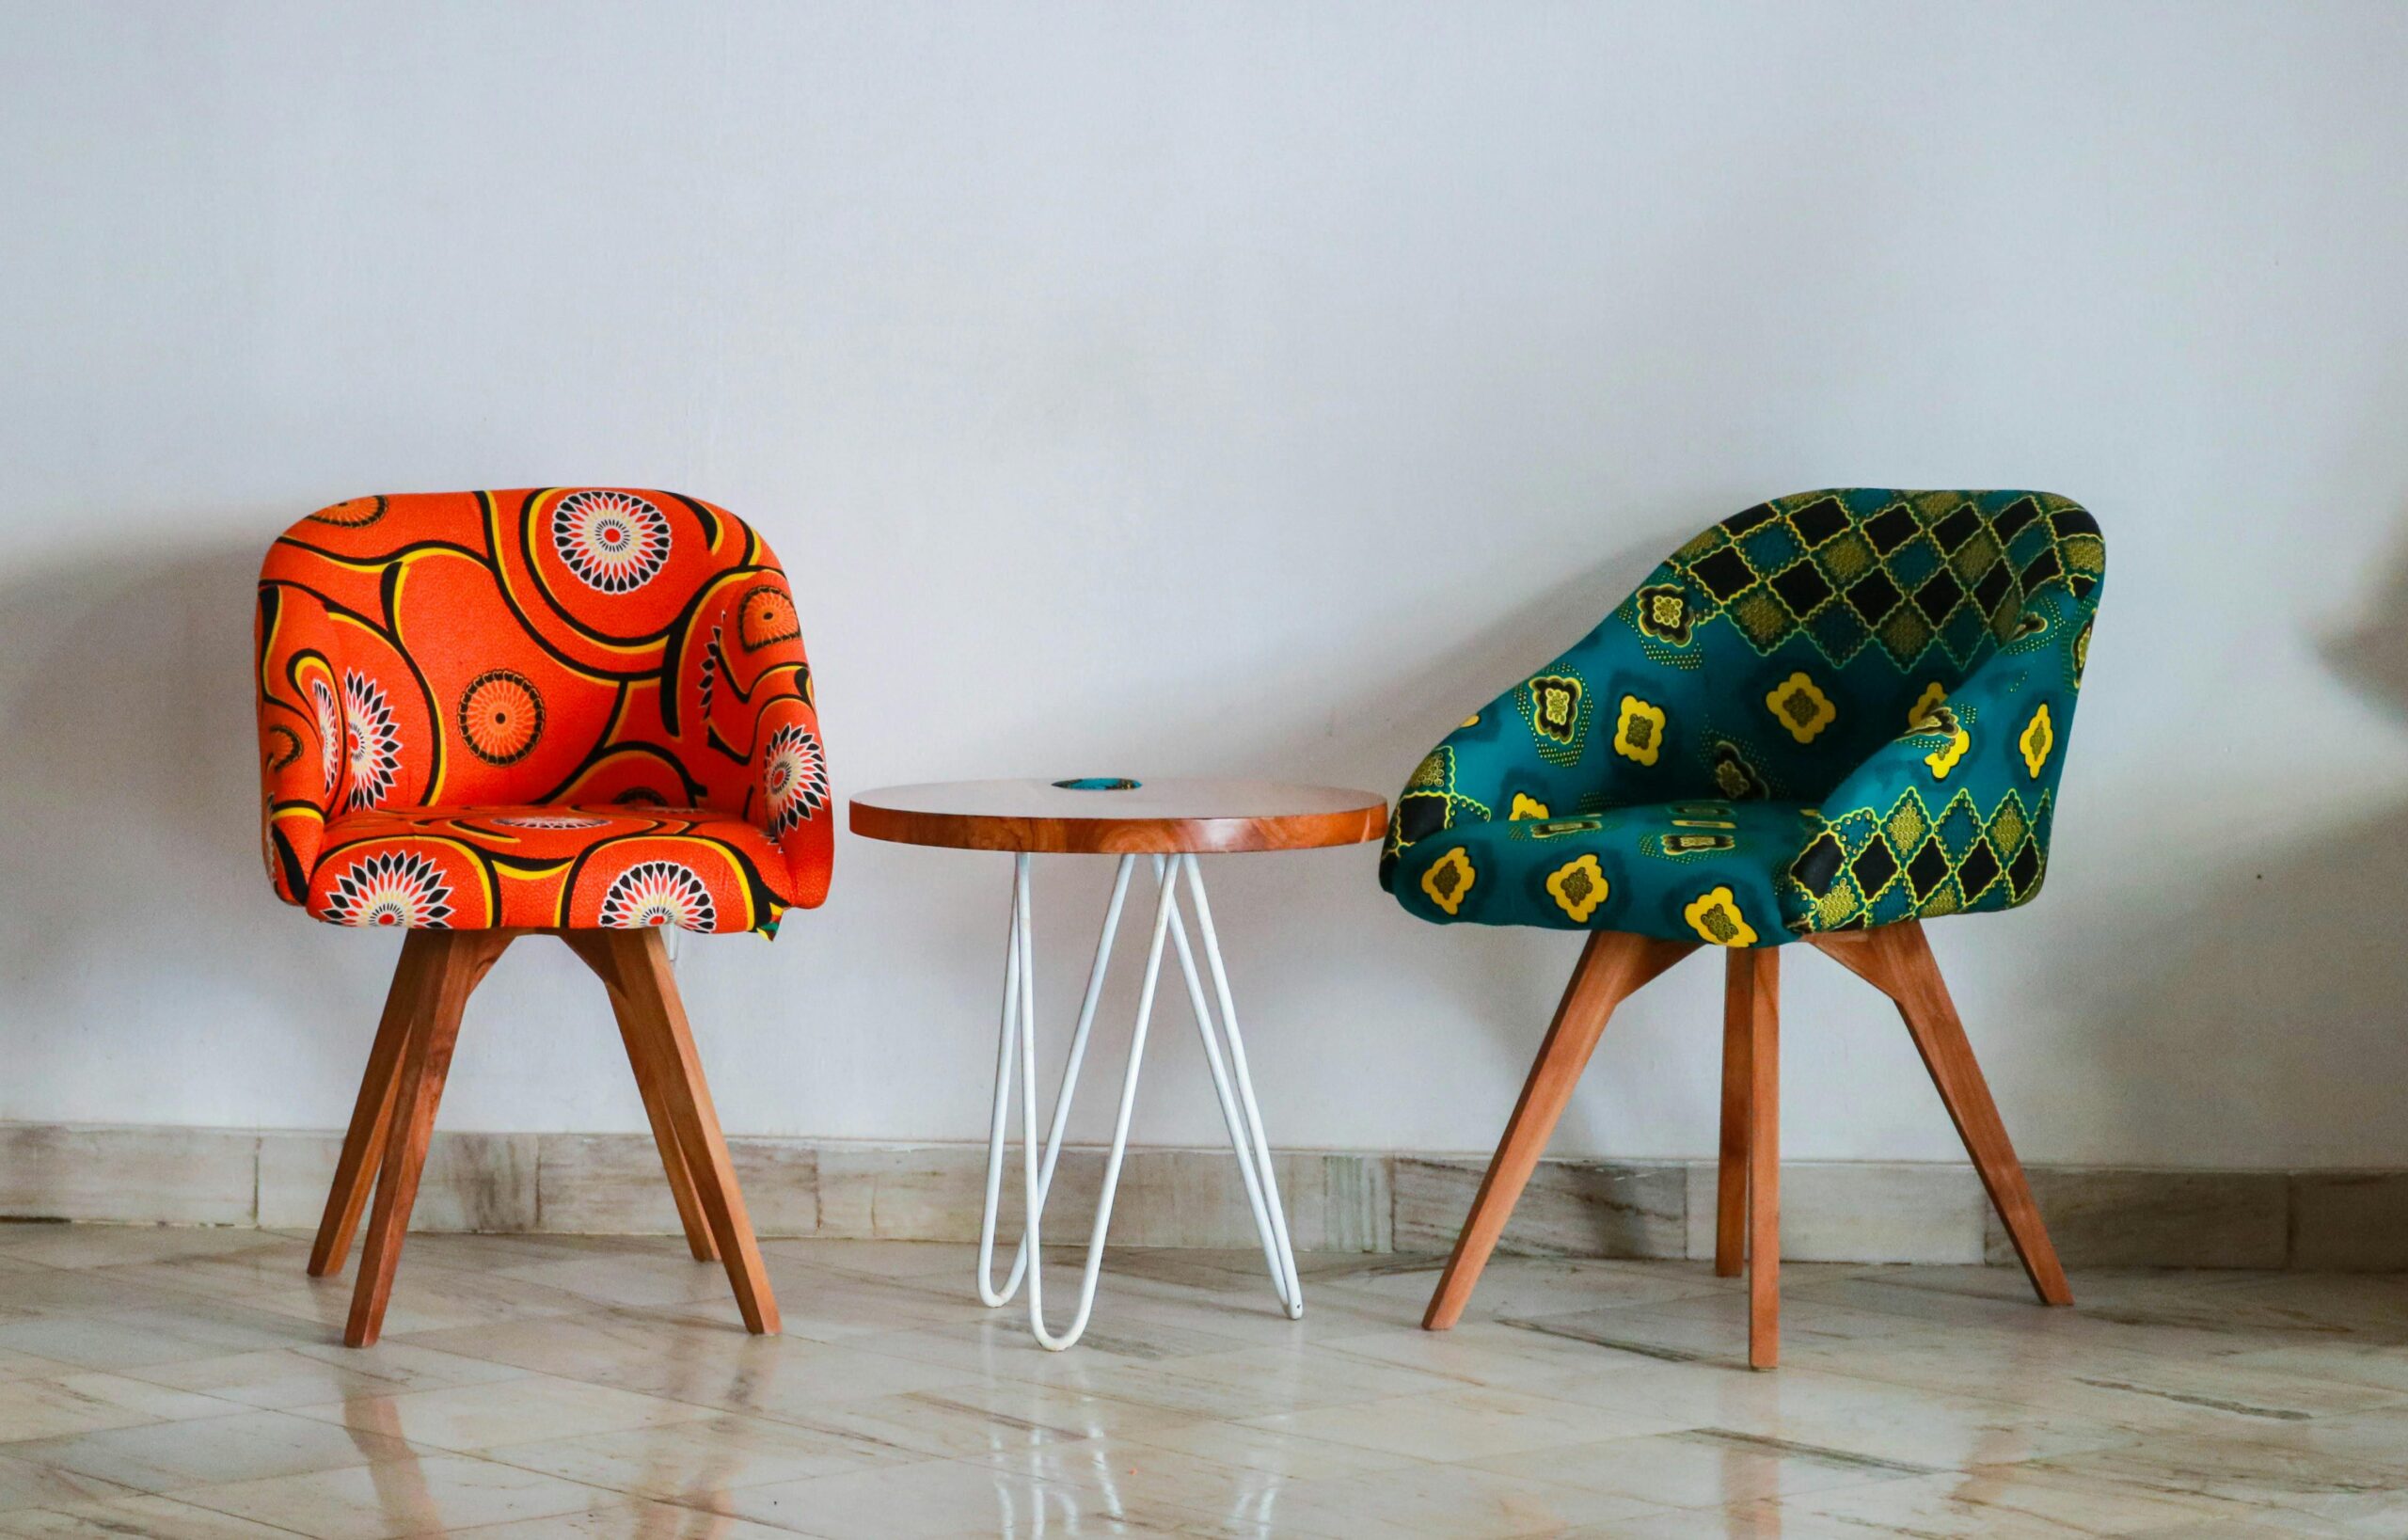 Eclectic chairs